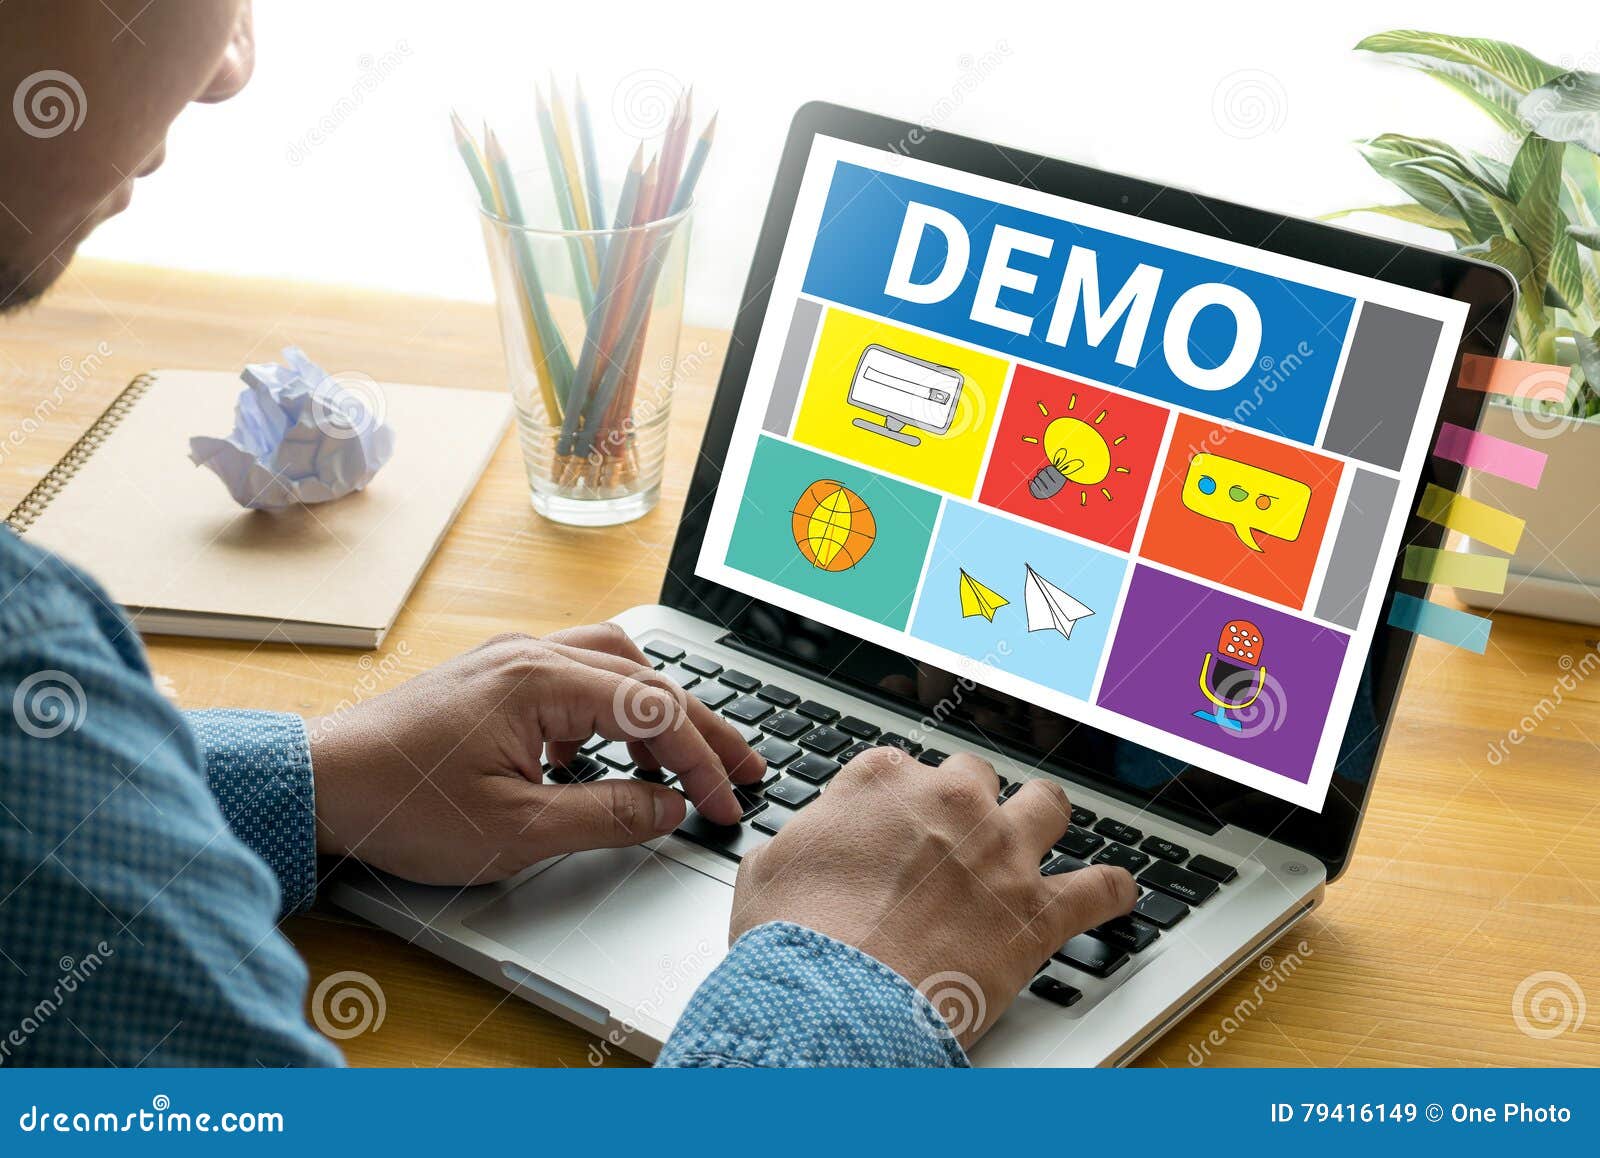 demo demo preview ideal